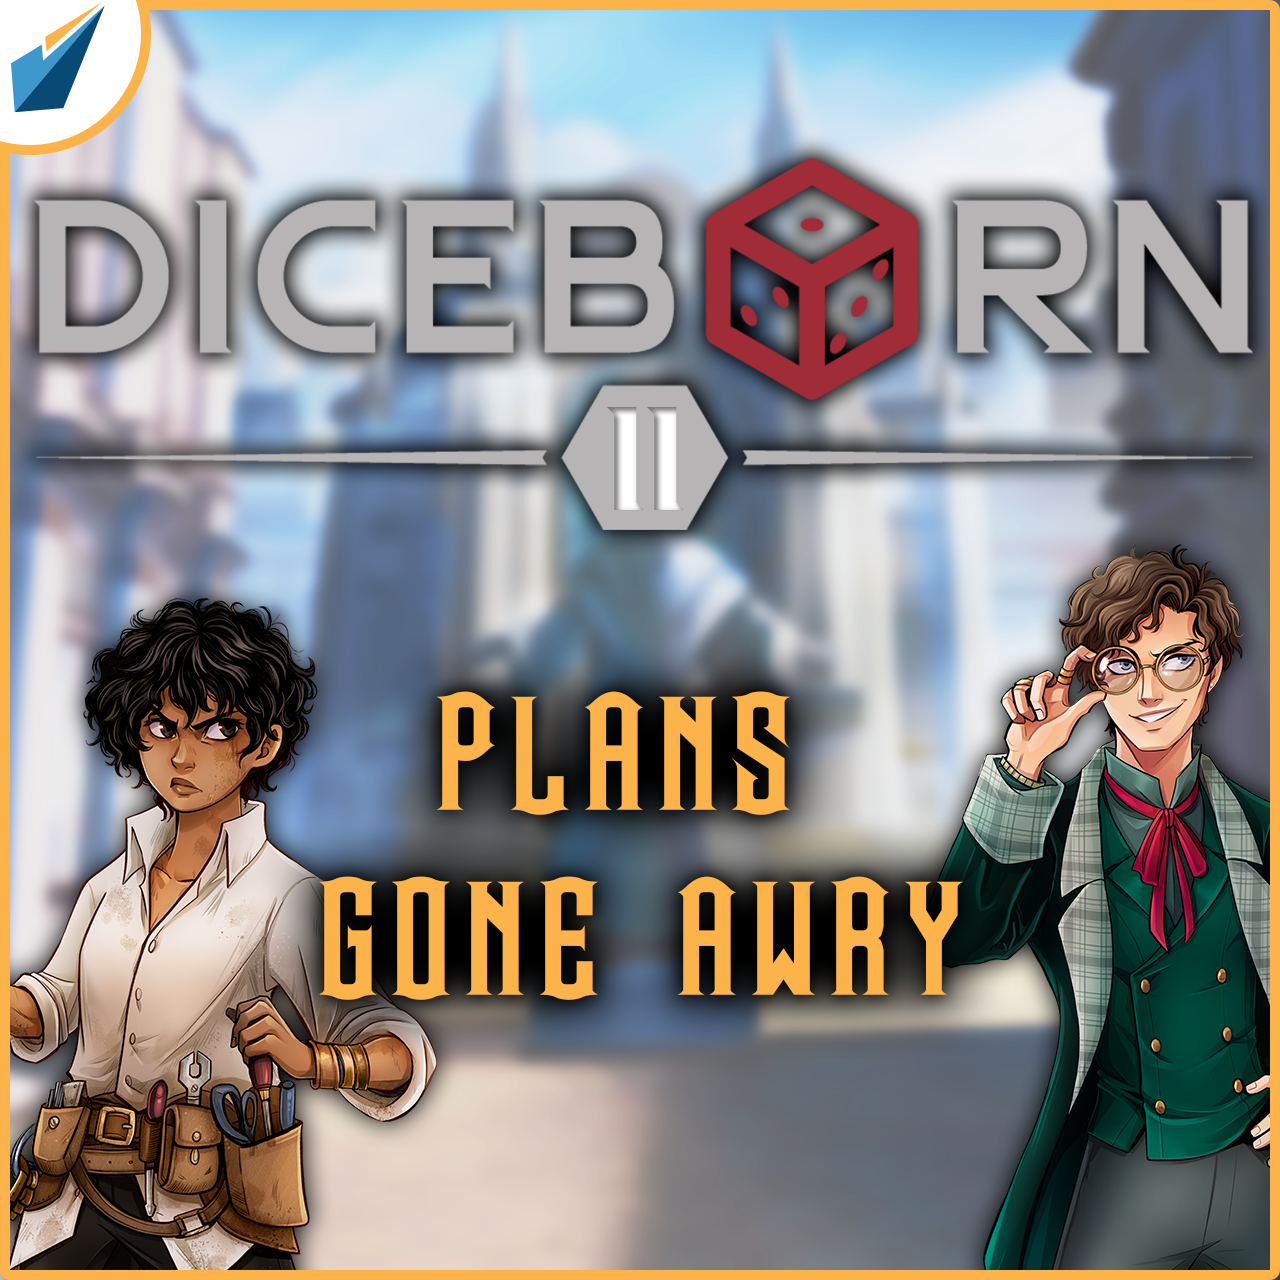 More information about "Diceborn: Episode 11 - Plans Gone Awry"